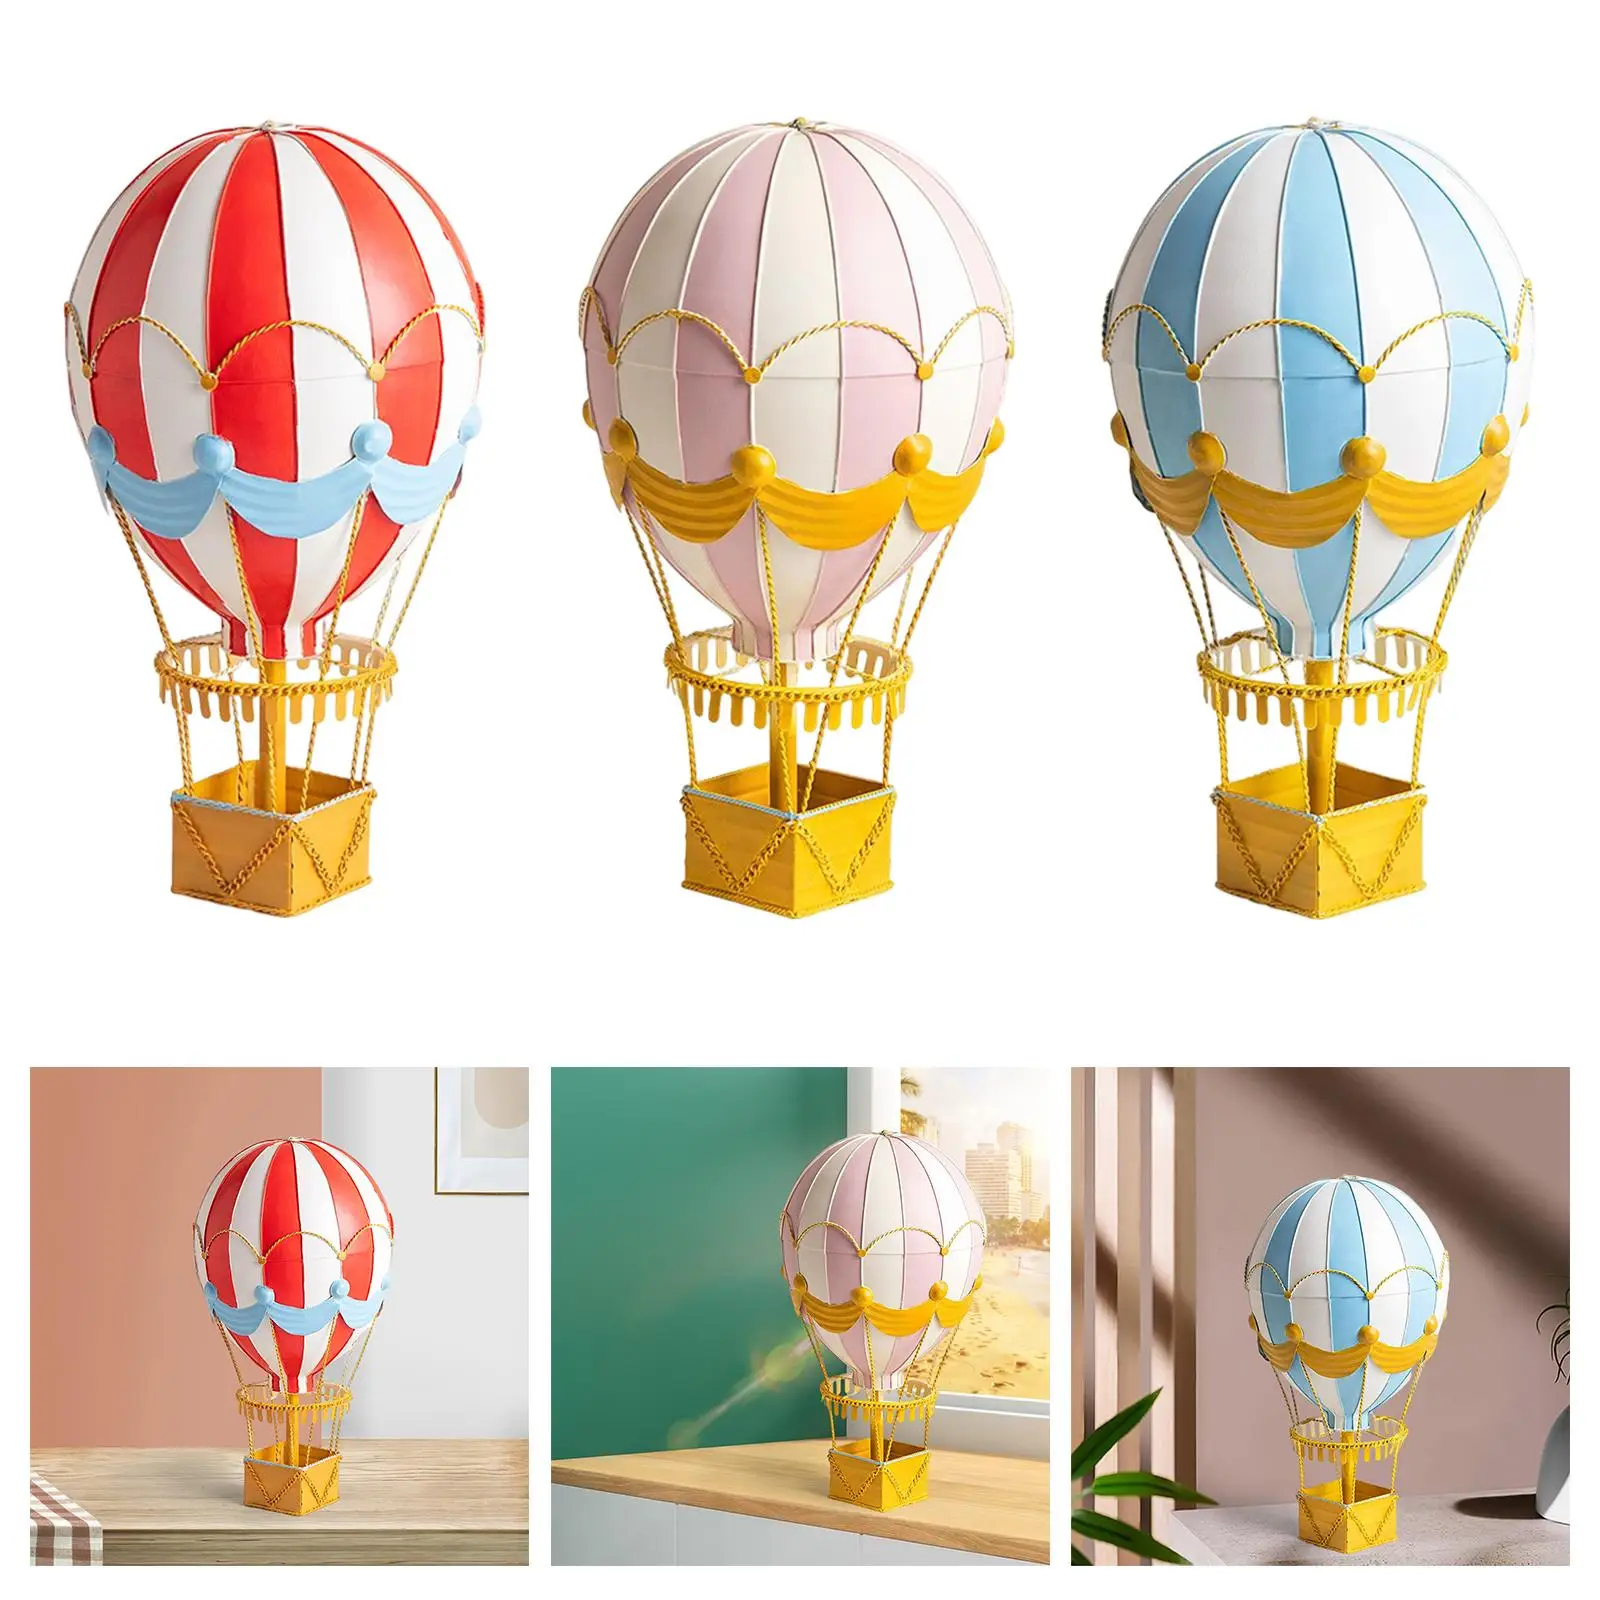 Novelty Hot Air Balloon Collection Ornament Hanging Crafts Creative for Home Desktop Office Table Centerpiece Decoration